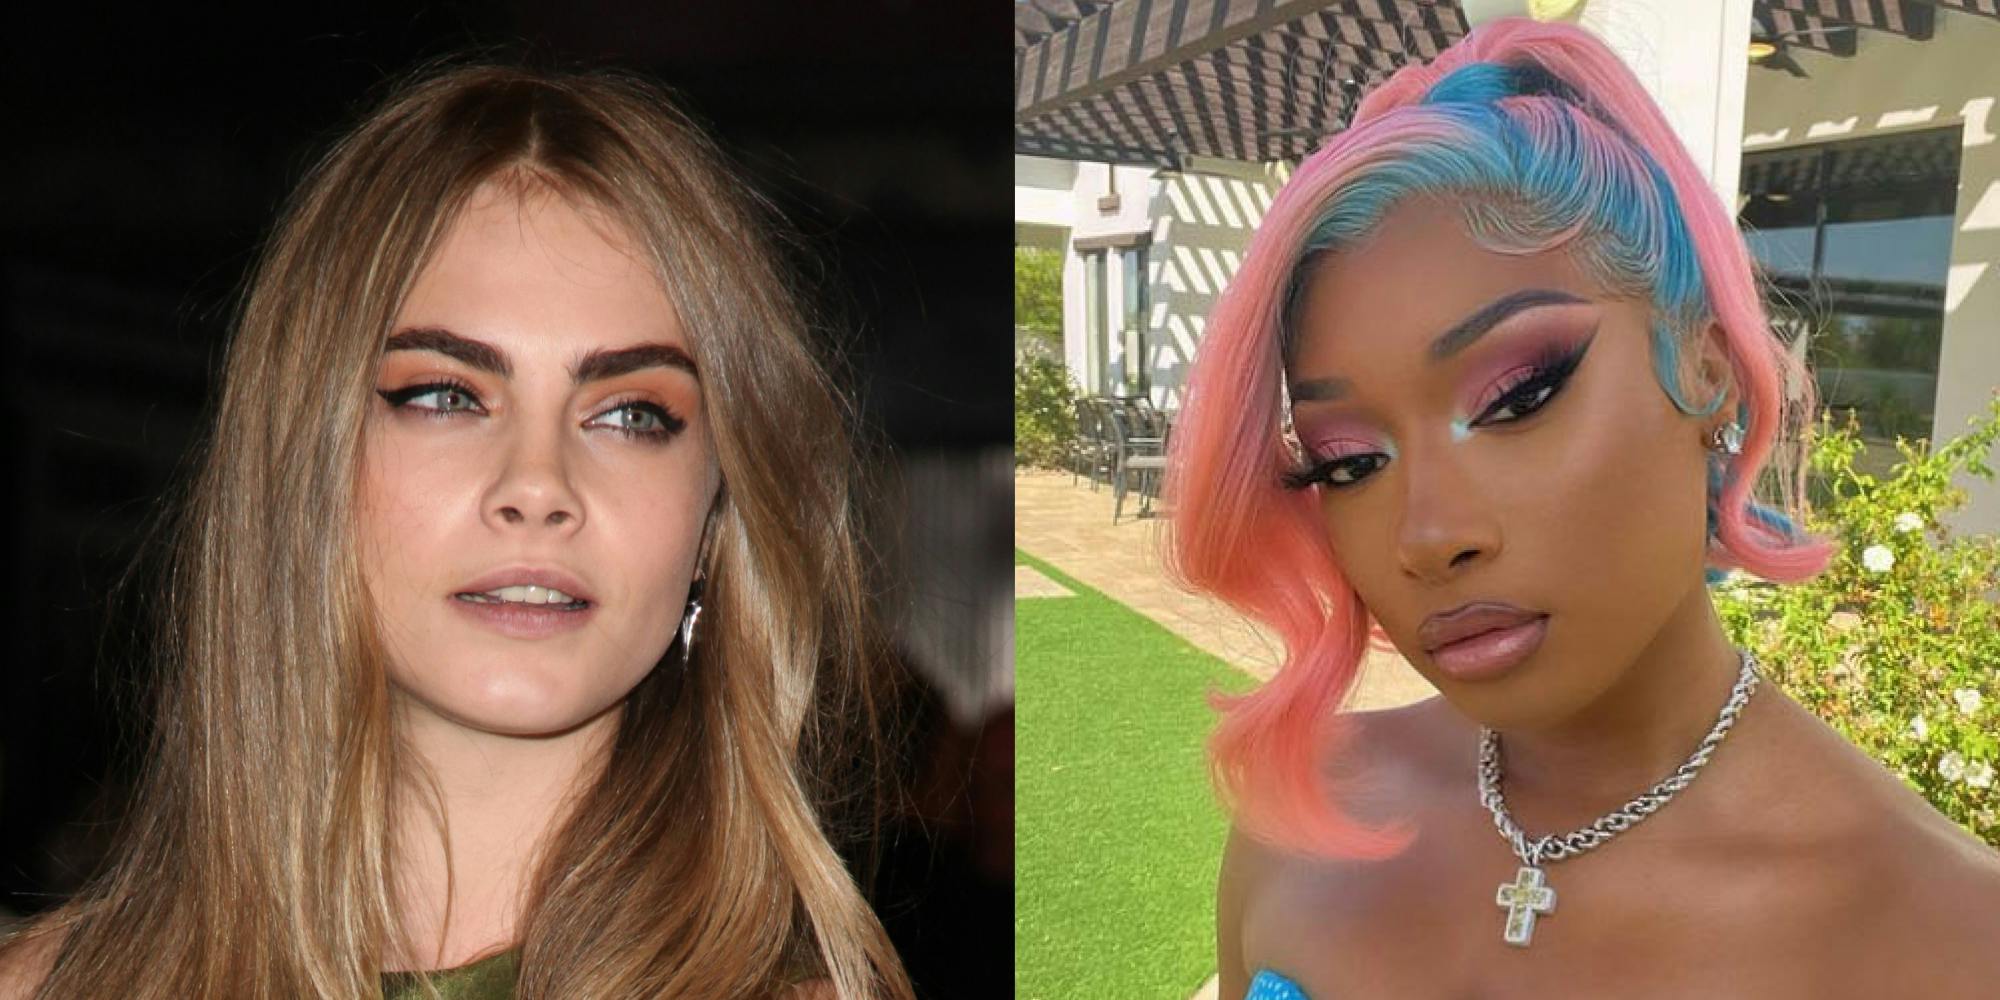 Cara Delevingne Called Out for Getting Too Close to Megan Thee Stallion